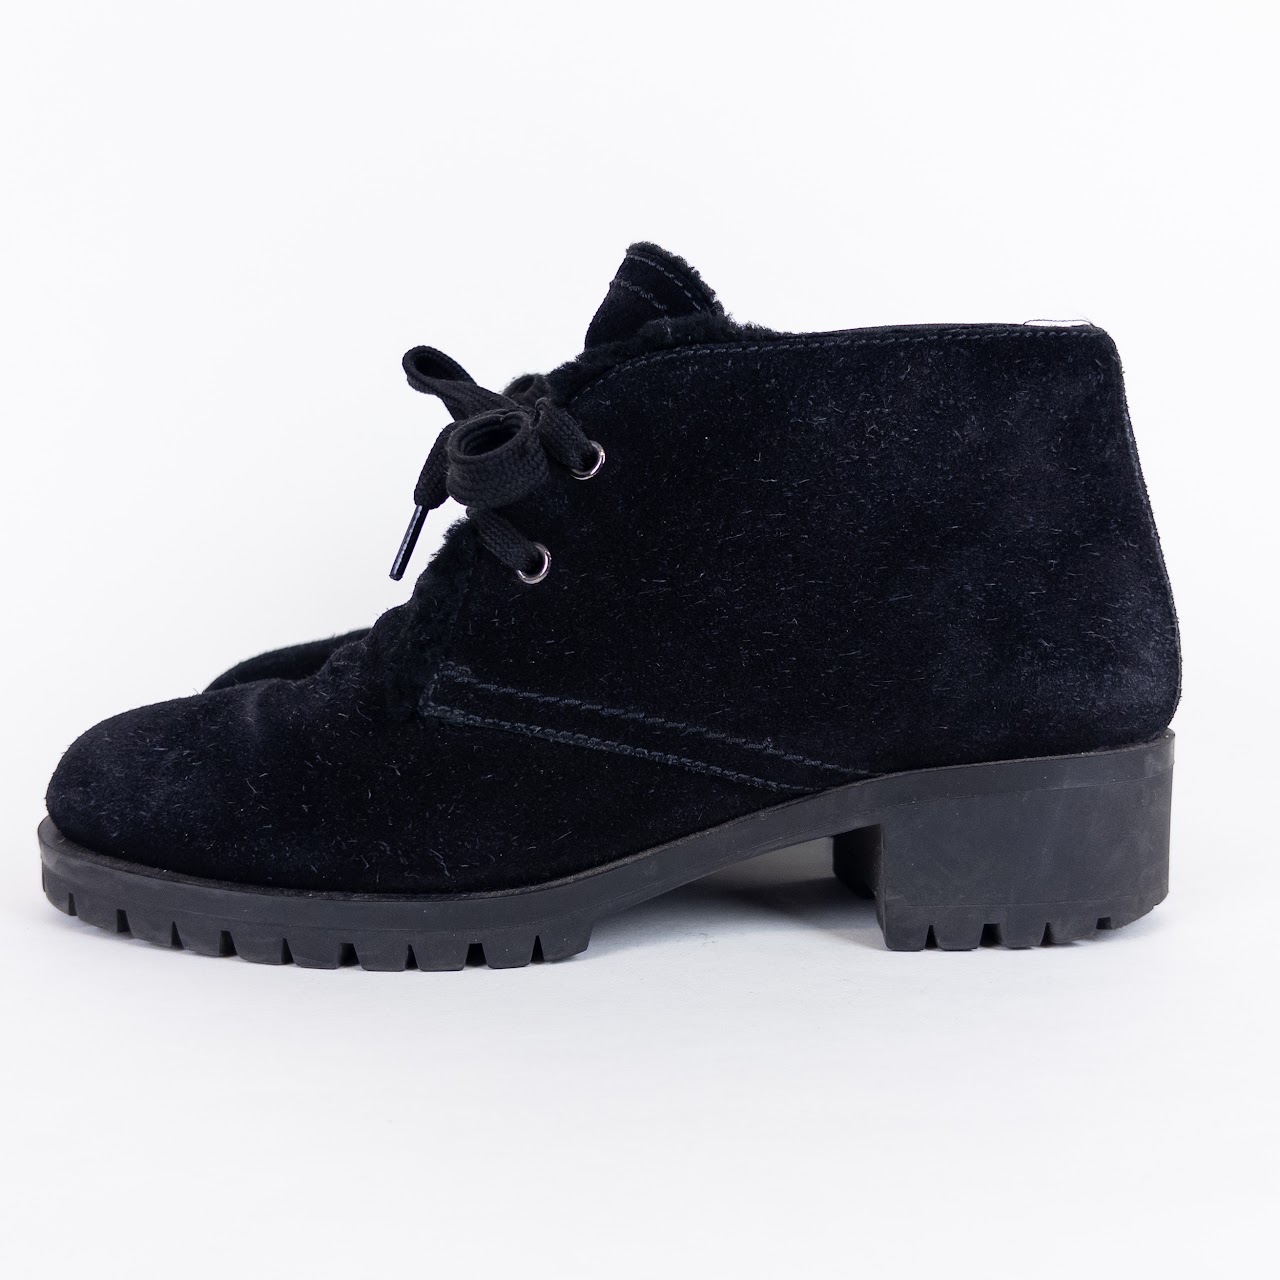 Pradsa Shearling Lined Suede Chukka Boots